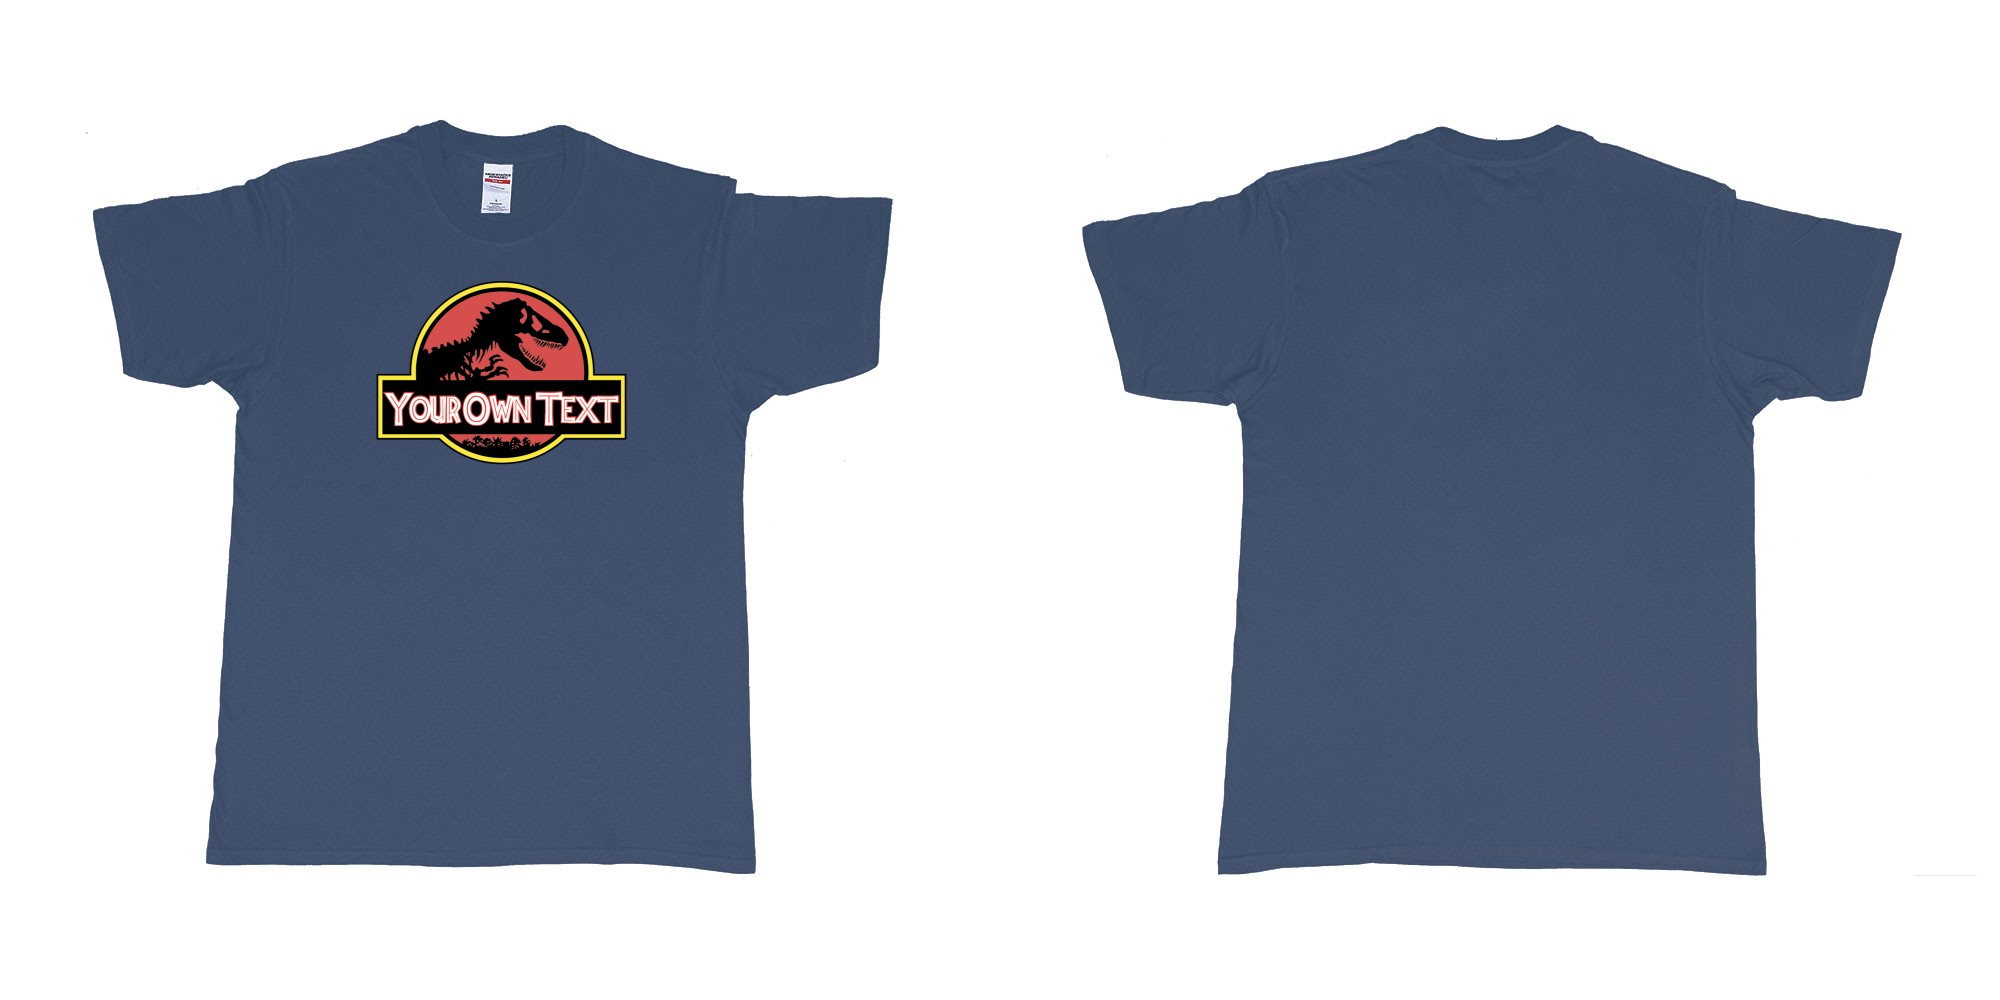 Custom tshirt design Jurassic Park in fabric color navy choice your own text made in Bali by The Pirate Way